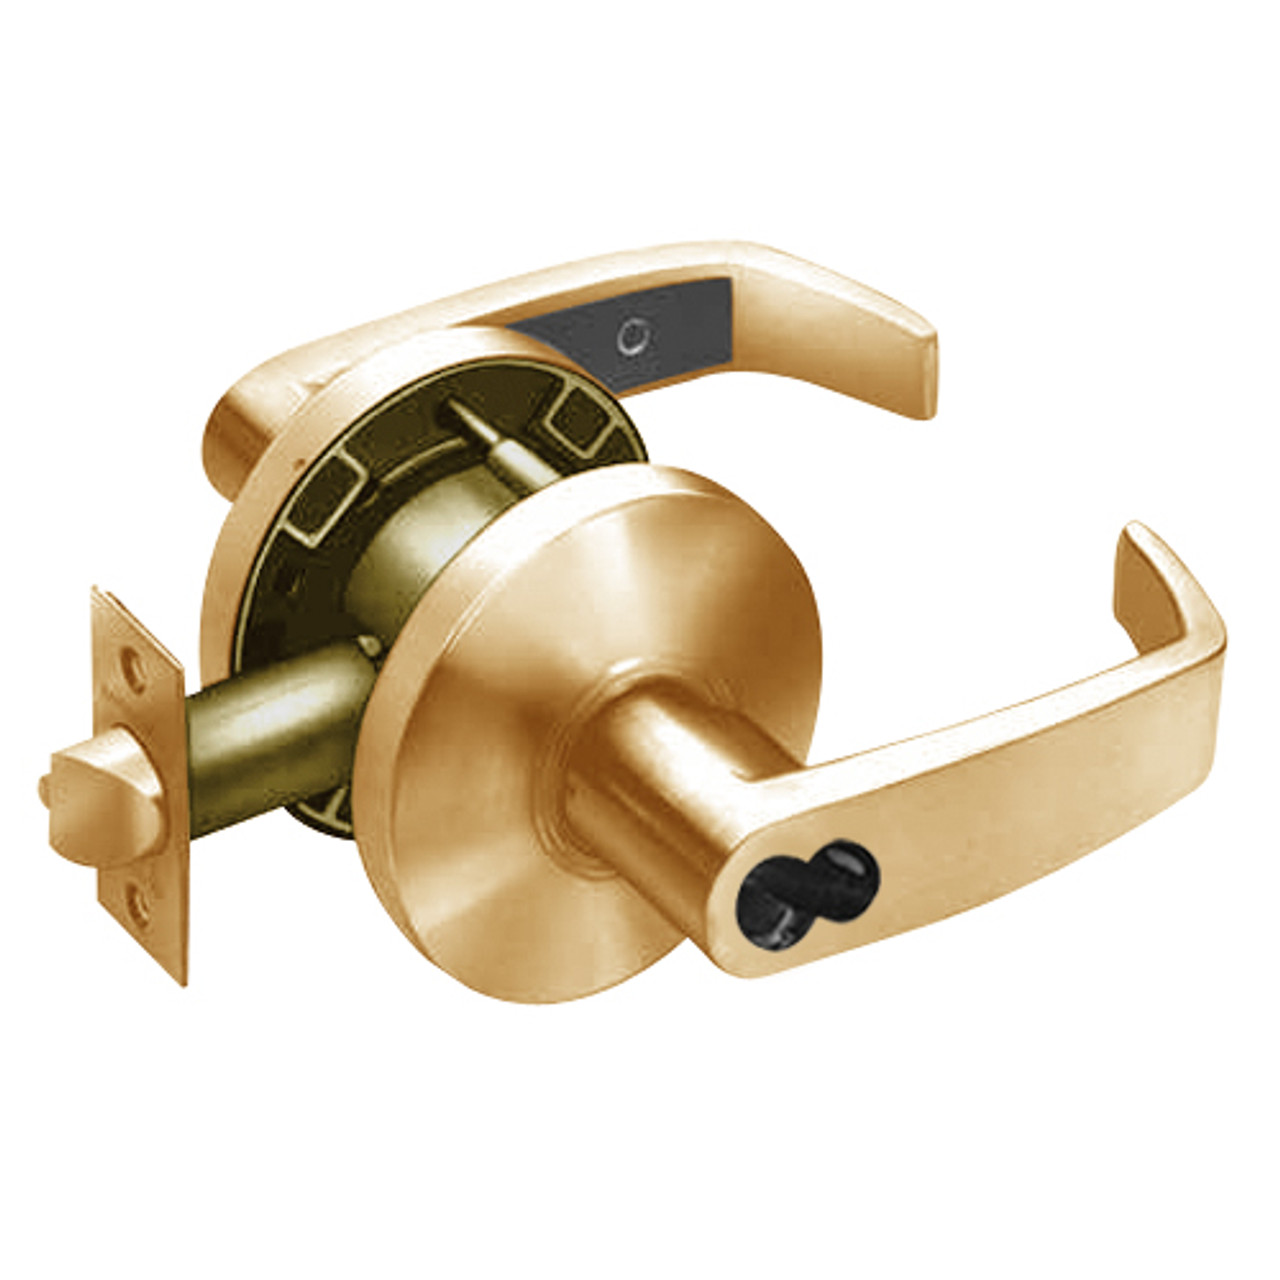 2860-65G37-KL-10 Sargent 6500 Series Cylindrical Classroom Locks with L Lever Design and K Rose Prepped for LFIC in Dull Bronze